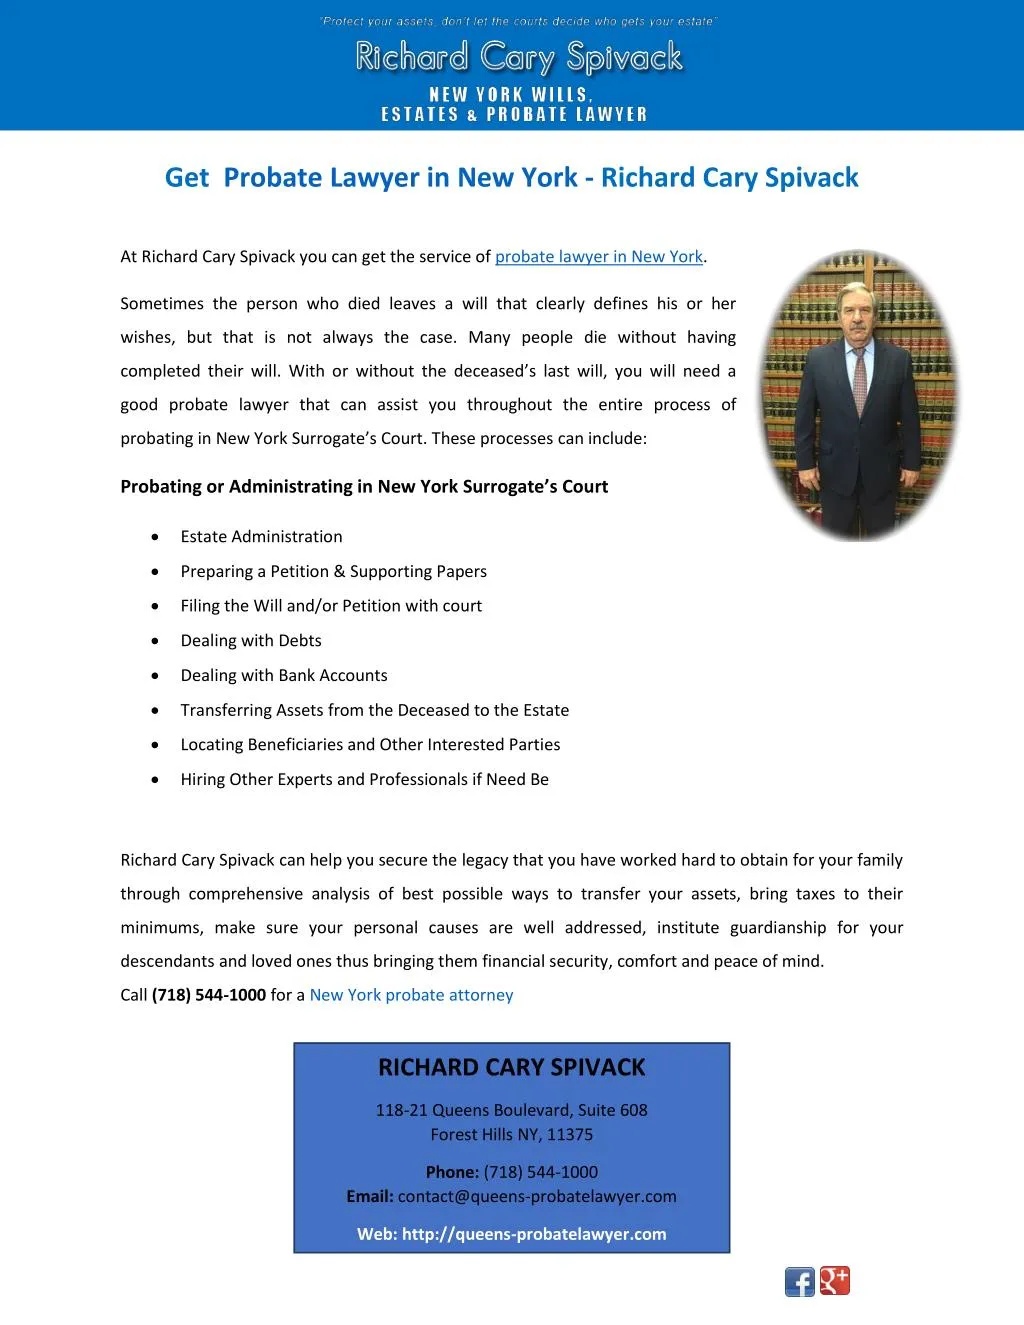 get probate lawyer in new york richard cary